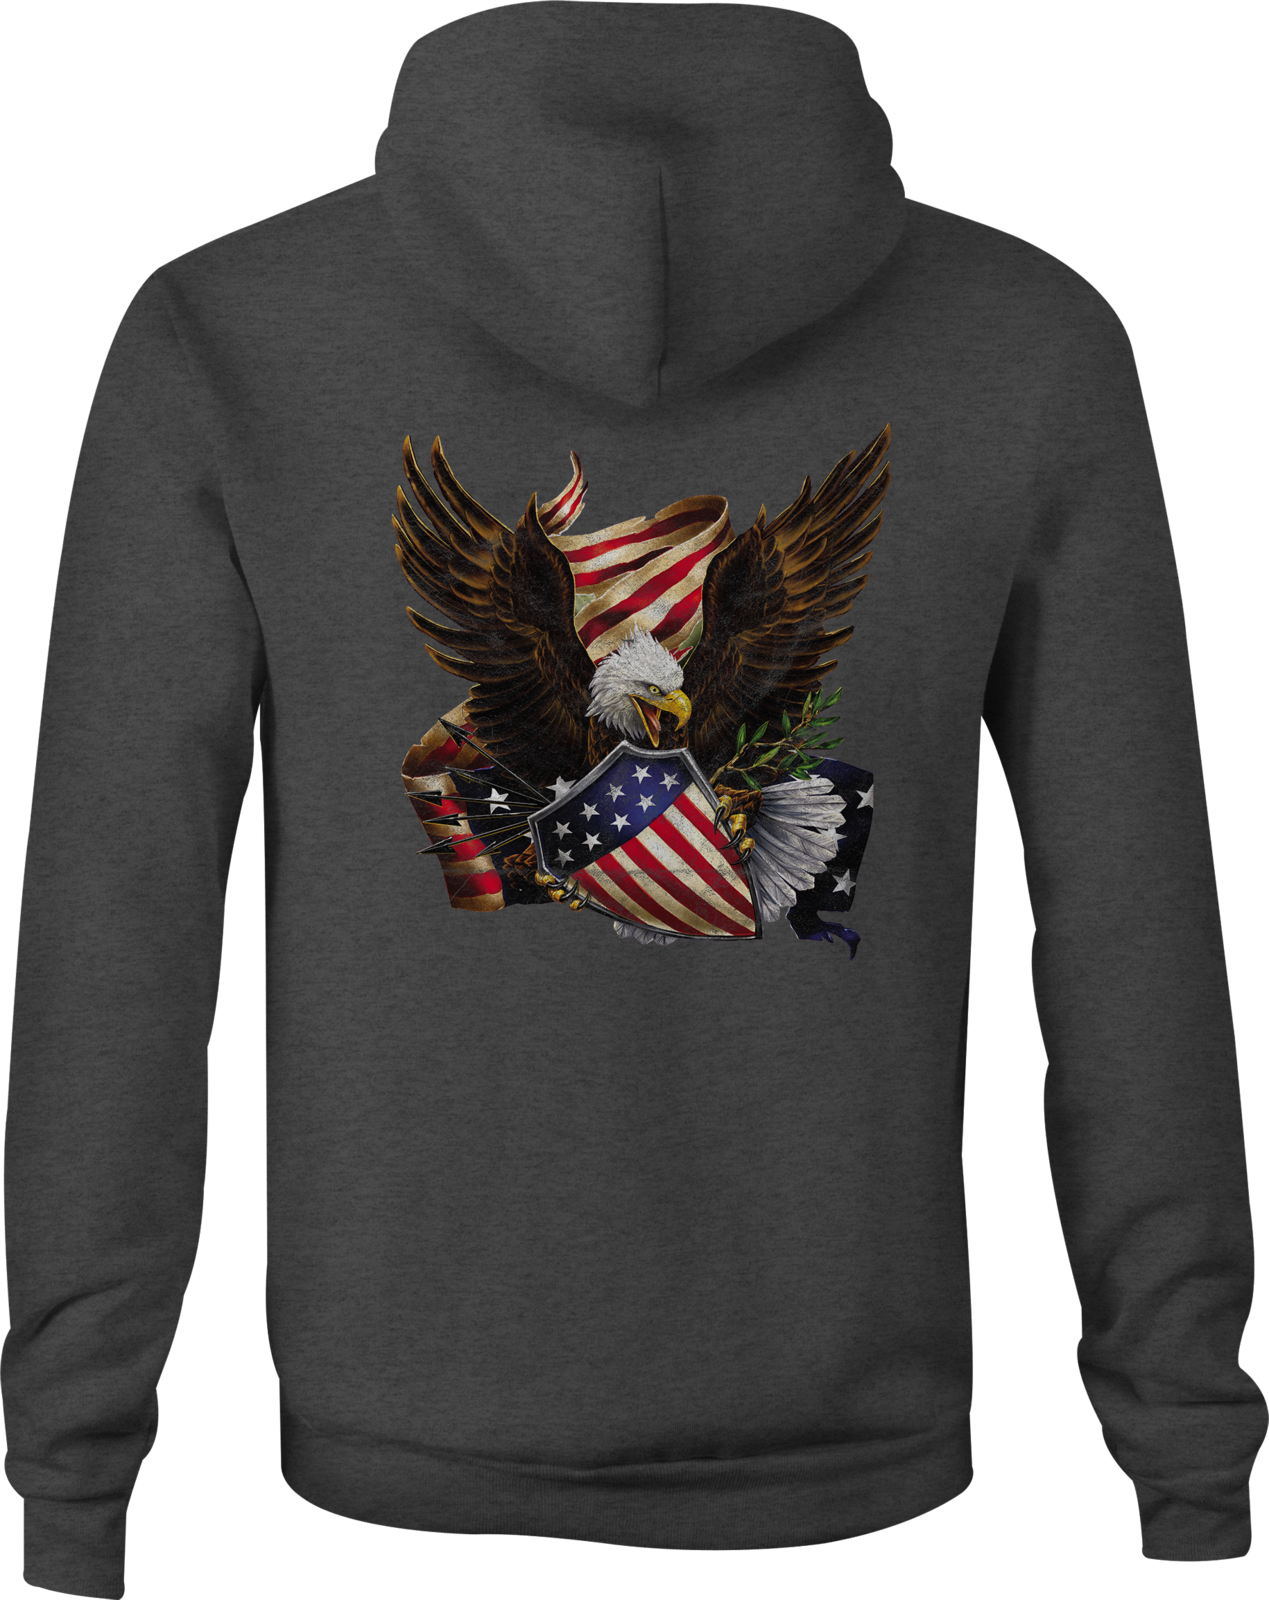 Zip Up Hoodie Realistic US Army Logo American Eagle Arrows and Flag ...